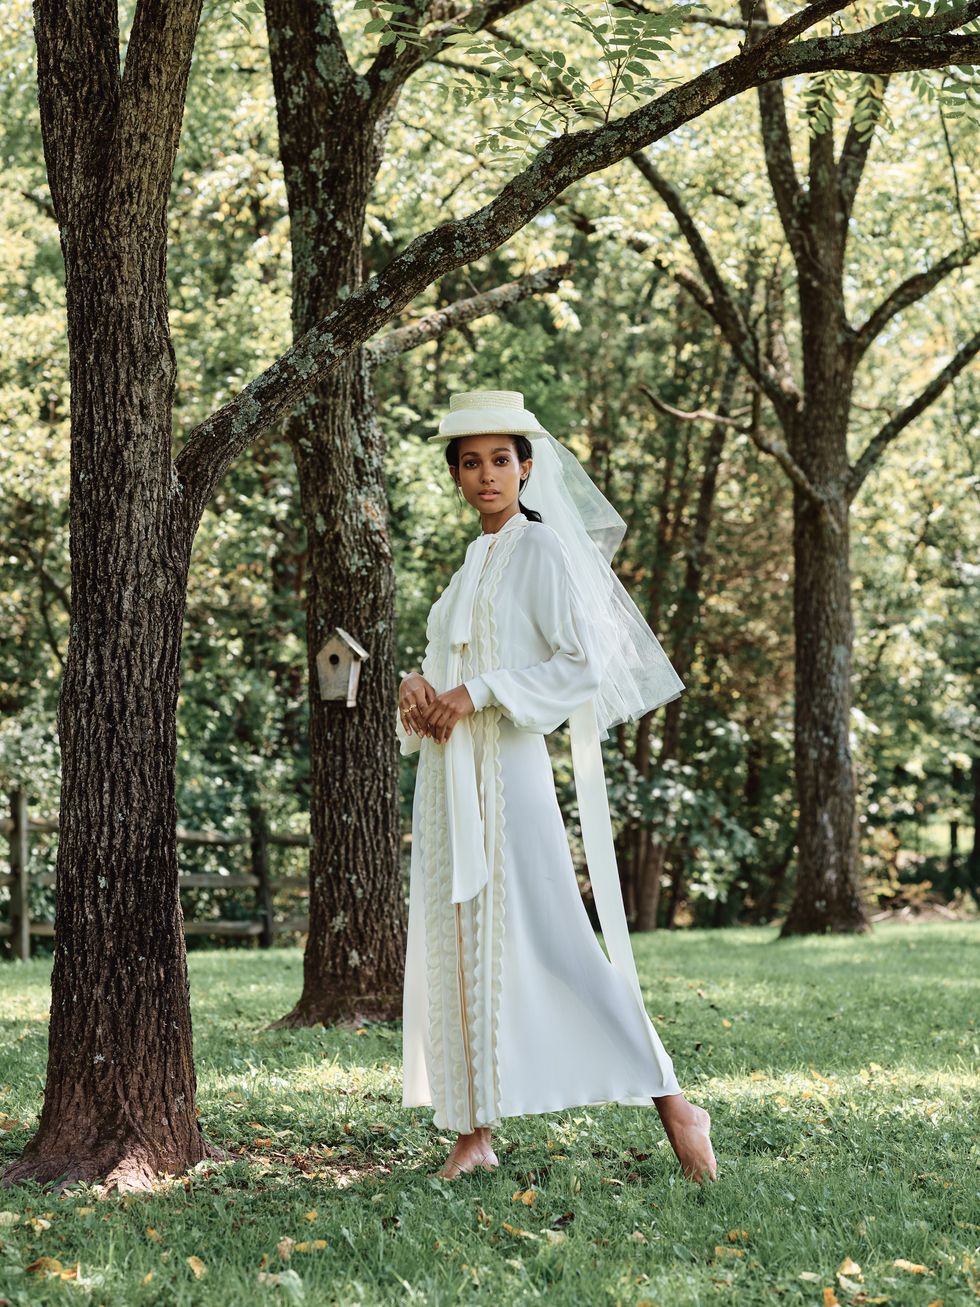 White, Clothing, Outerwear, Robe, Tree, Spring, Dress, Grass, Lawn, Plant, 